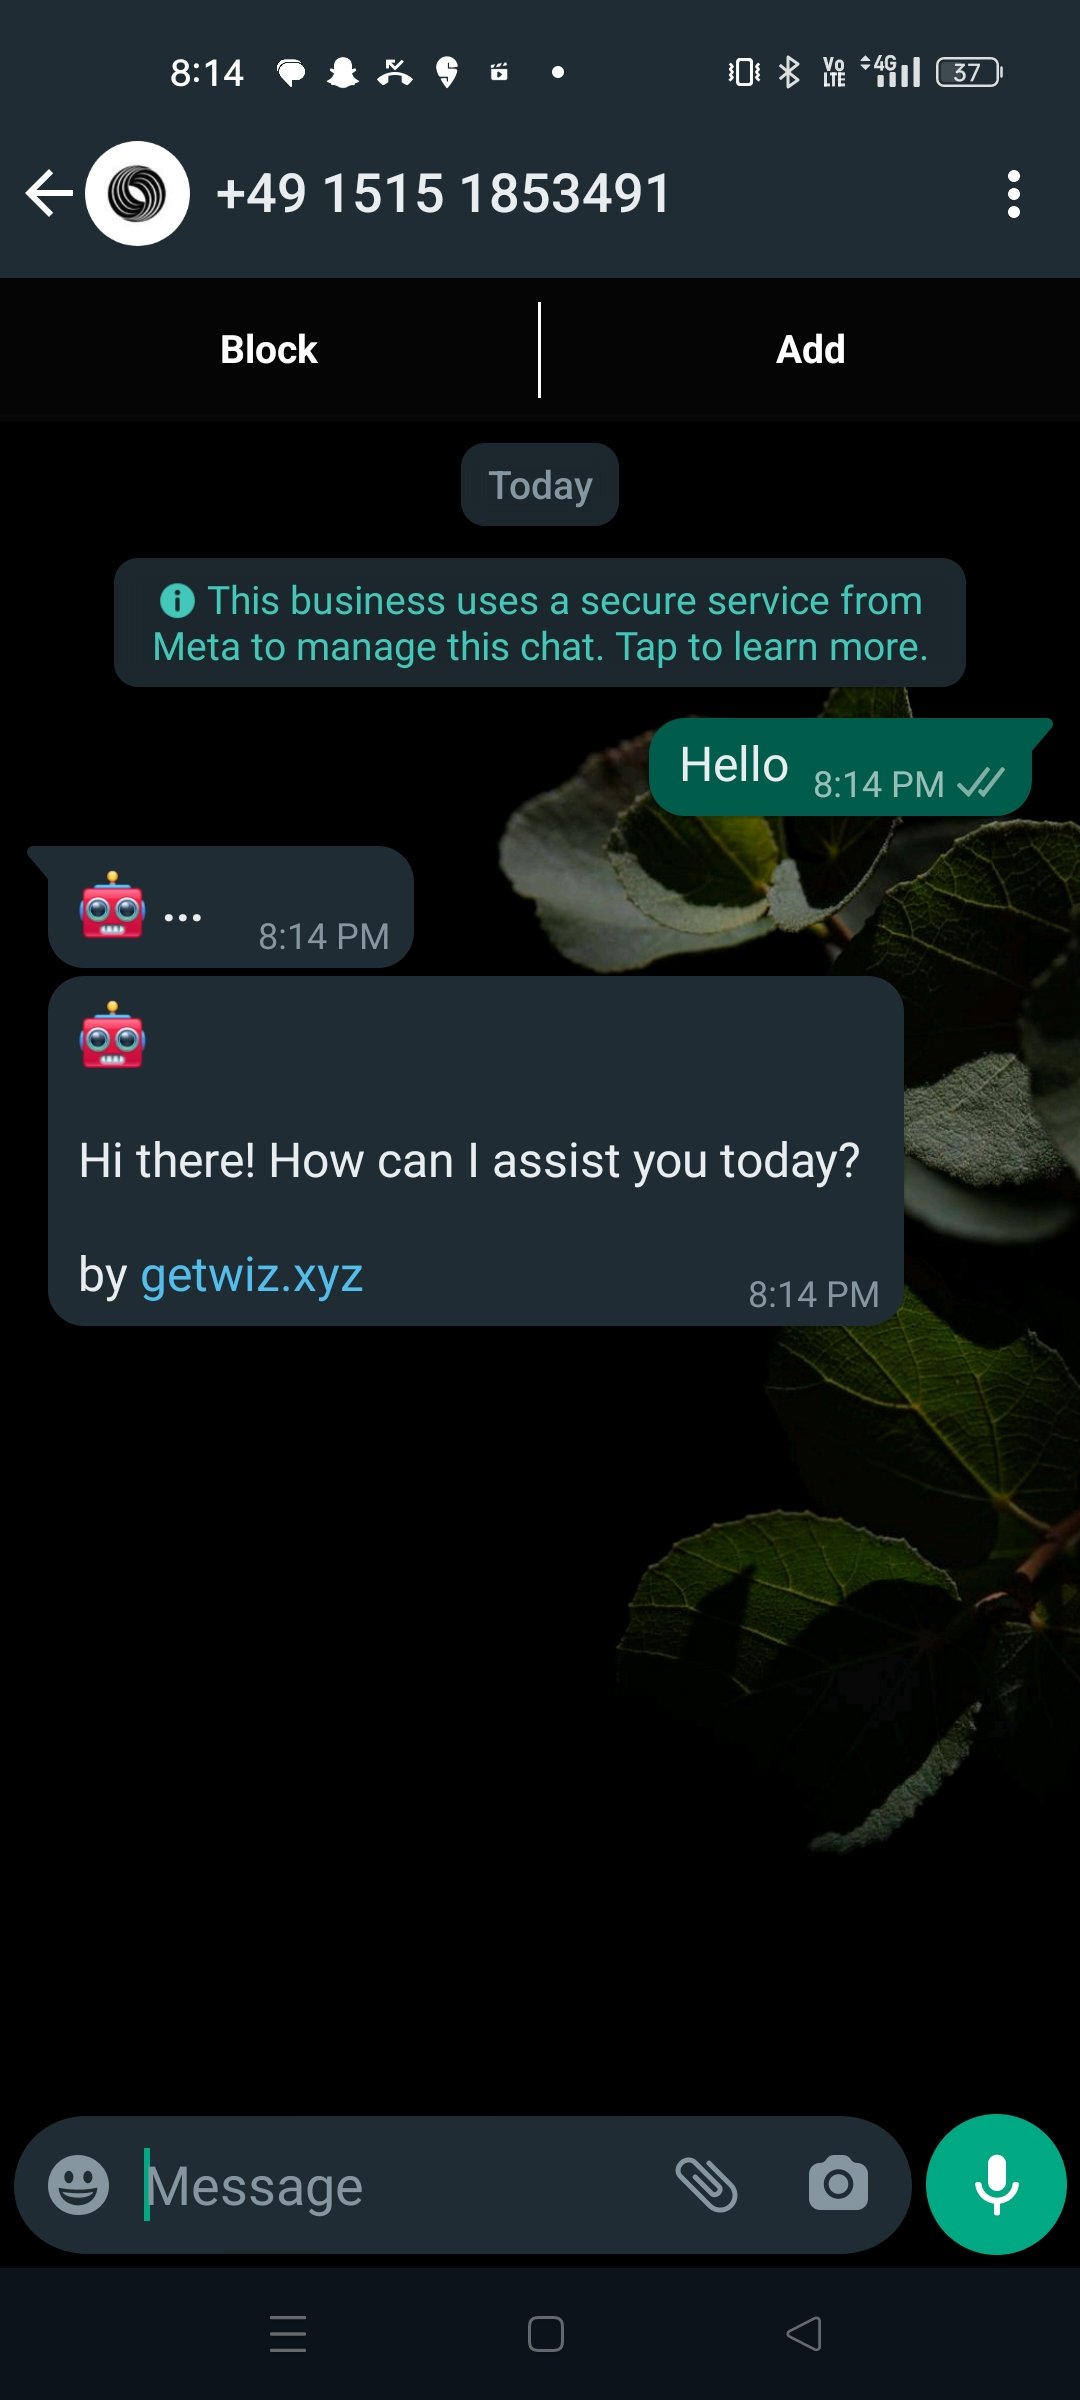 You can just enter "Hello" and send a message to begin chatting with the bot.